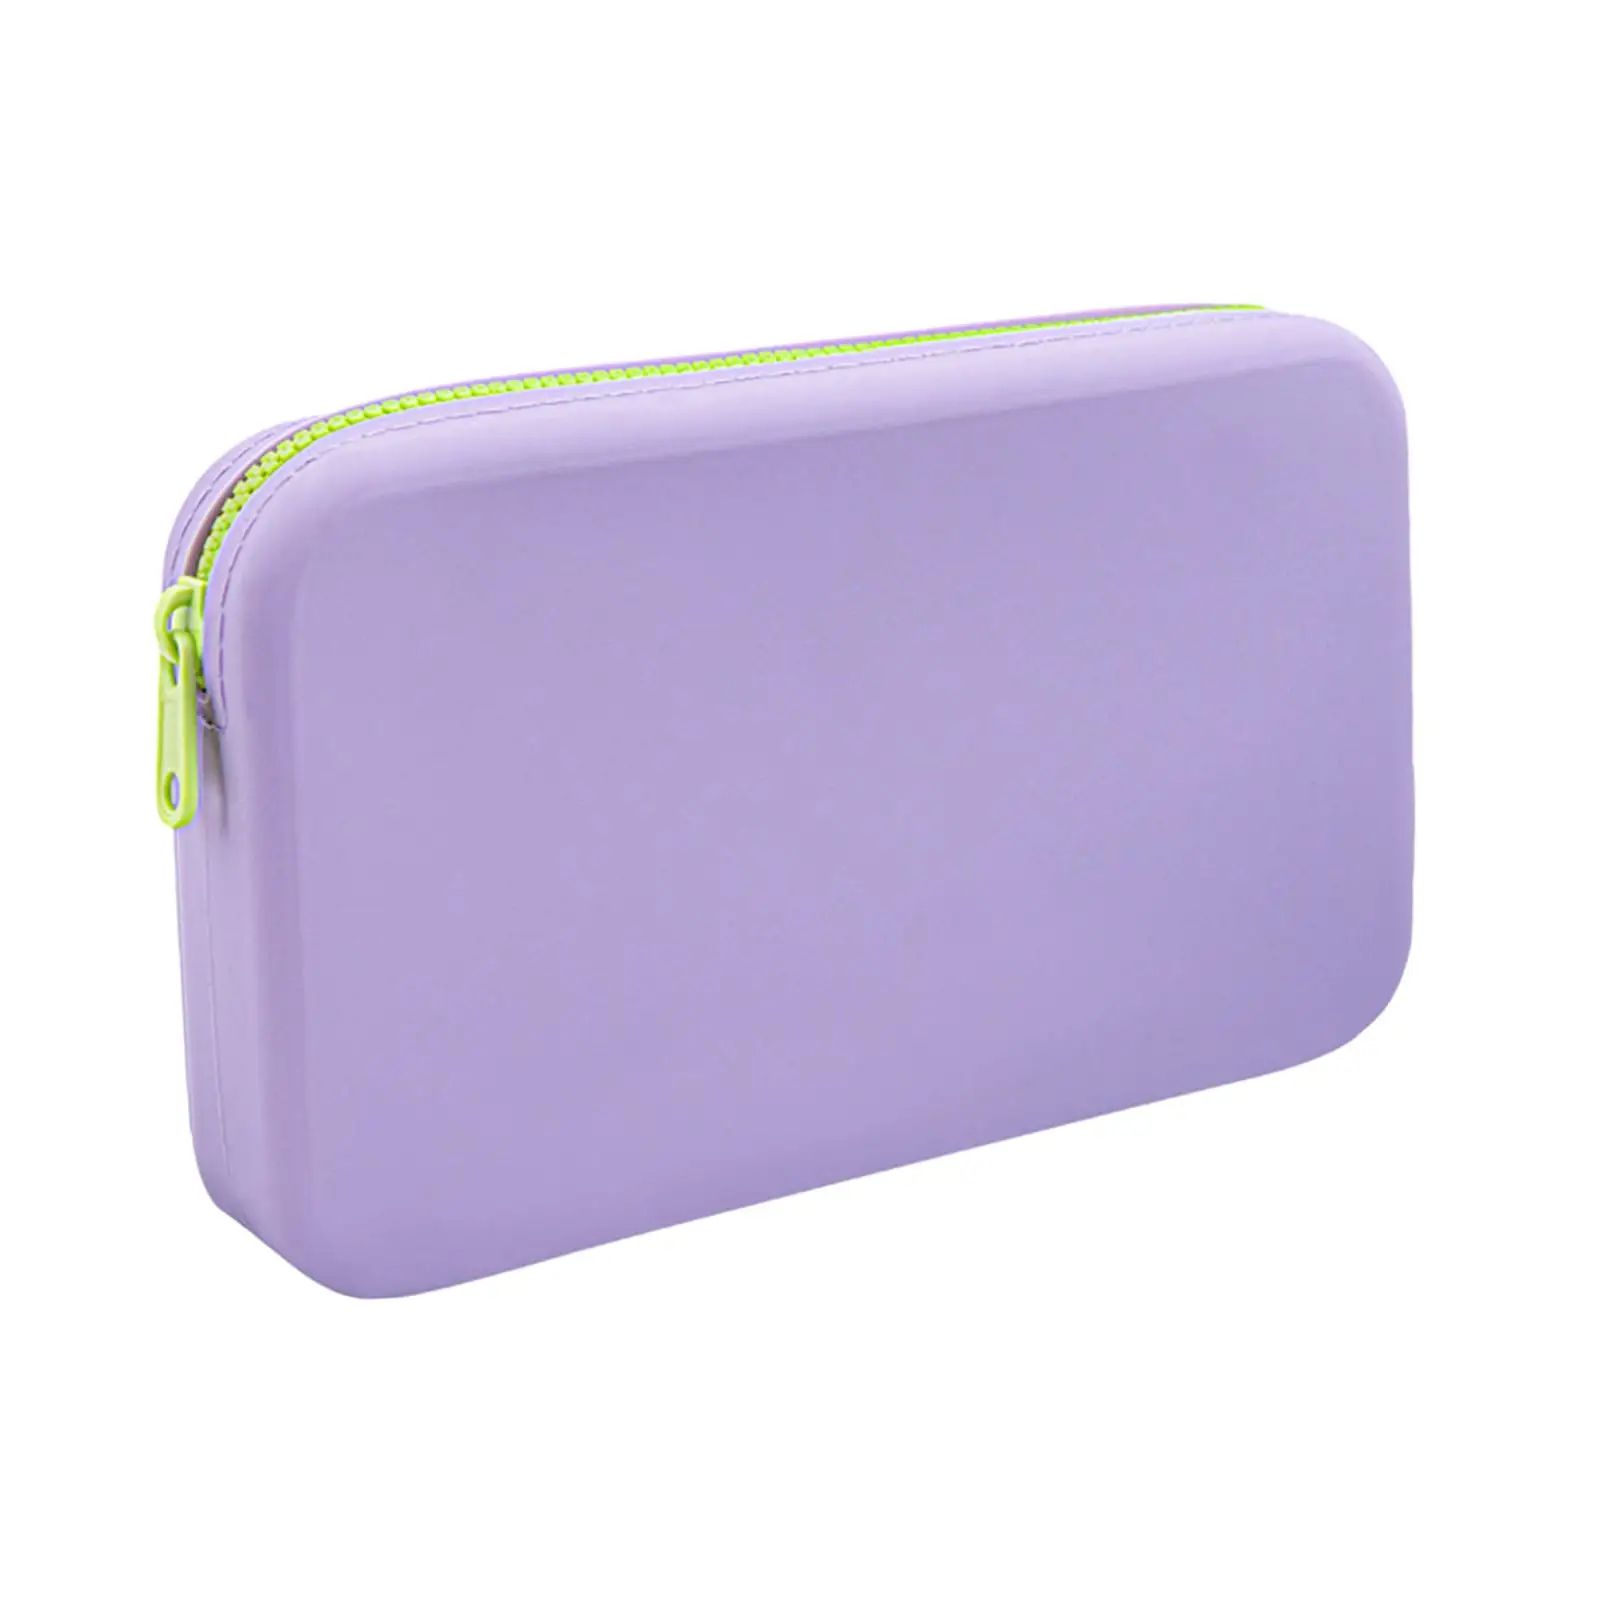 Makeup Organizer Silicon Toiletry Bags Portable Cosmetic Storage Bag for Hair Accessories Business Trips Home Gym Bathroom Women